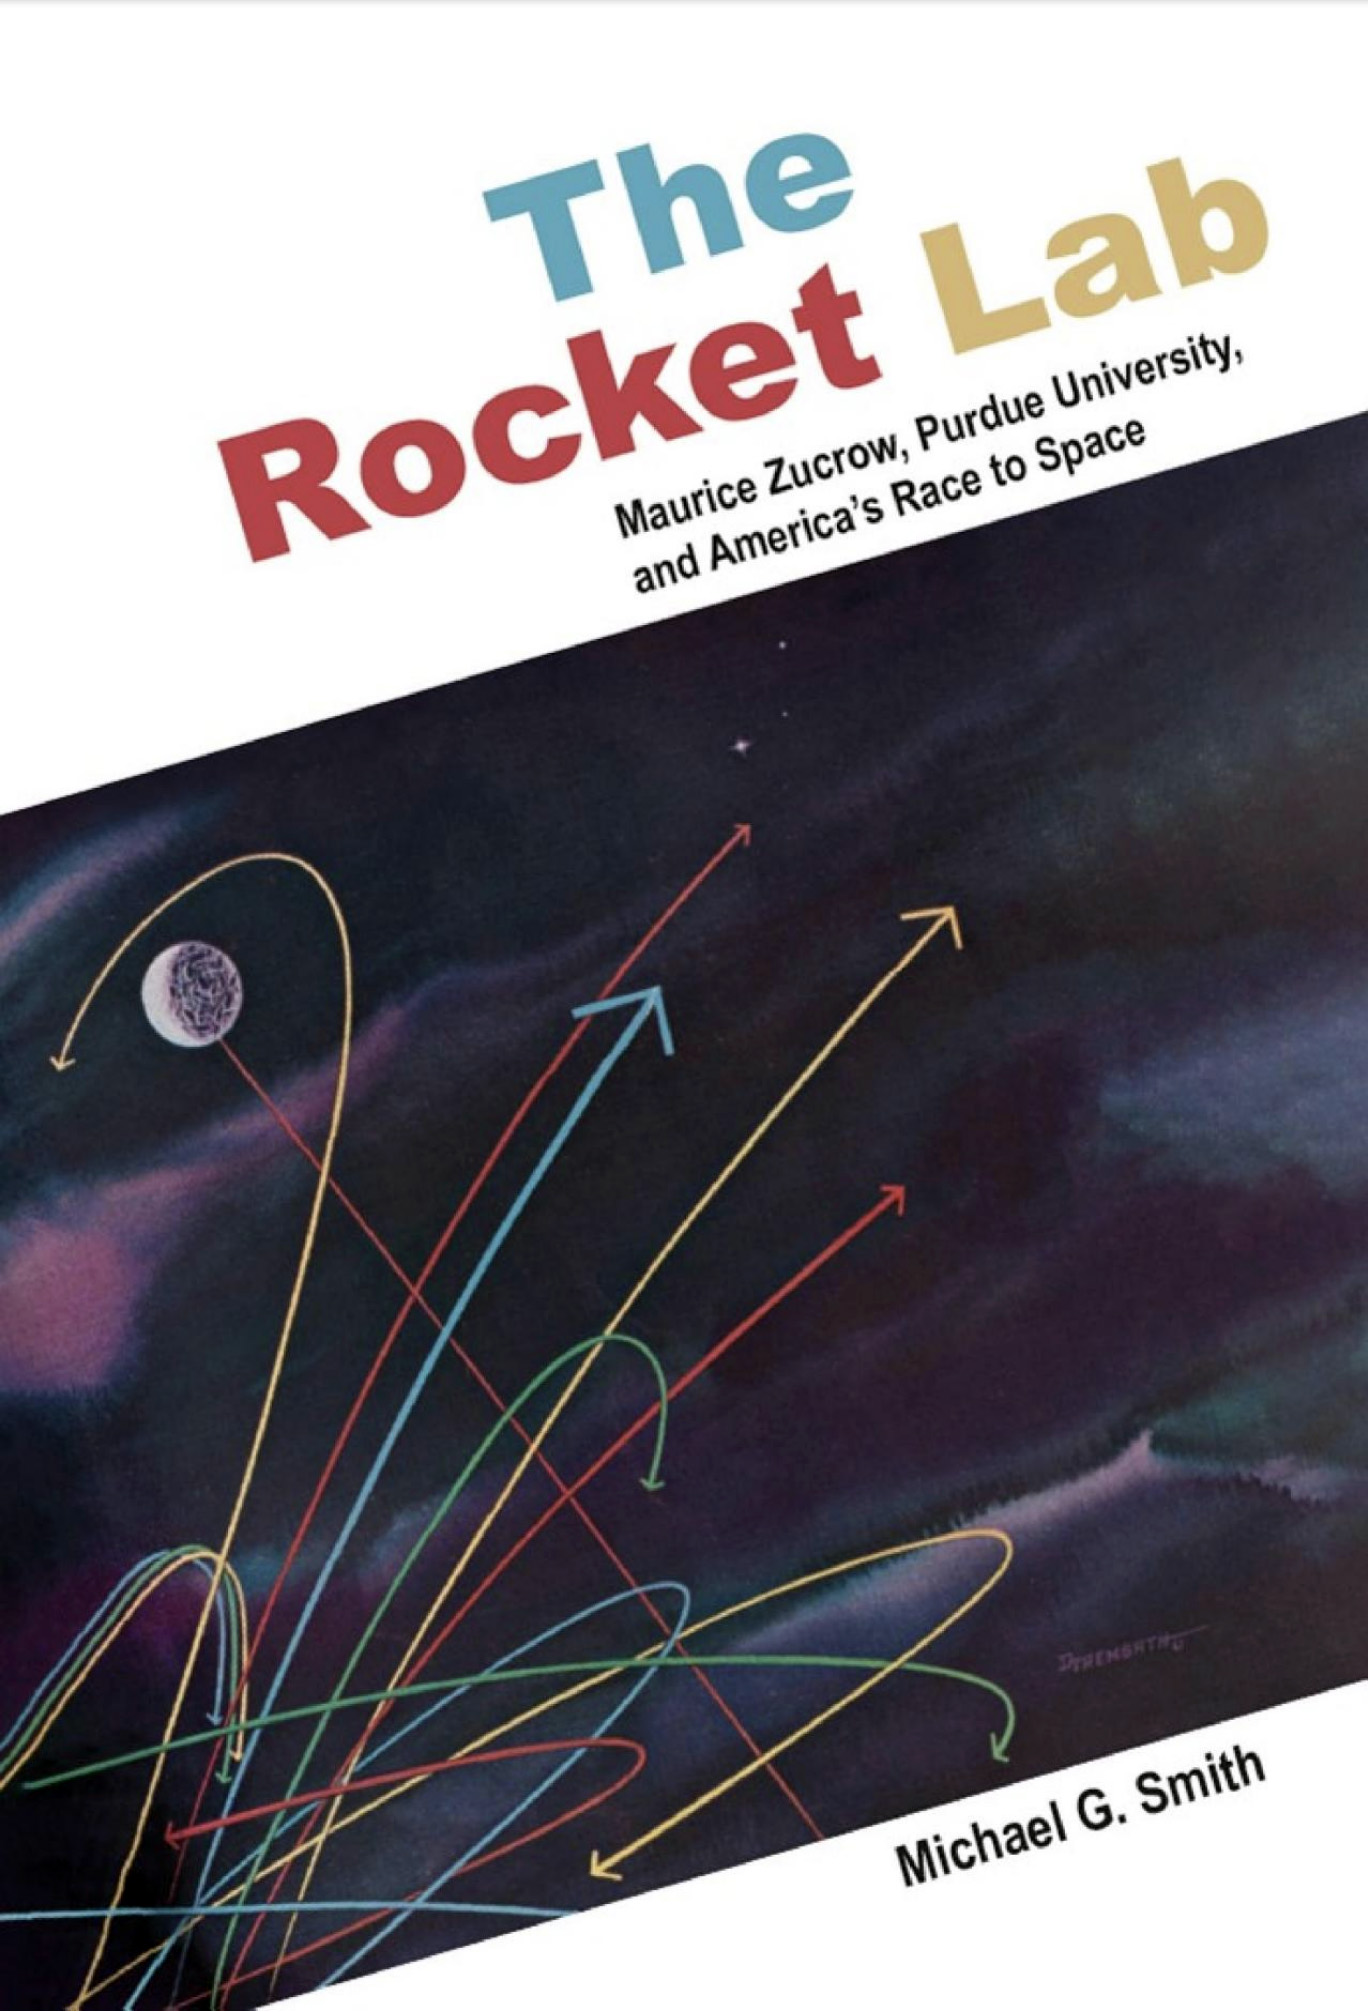 The Rocket Lab book cover